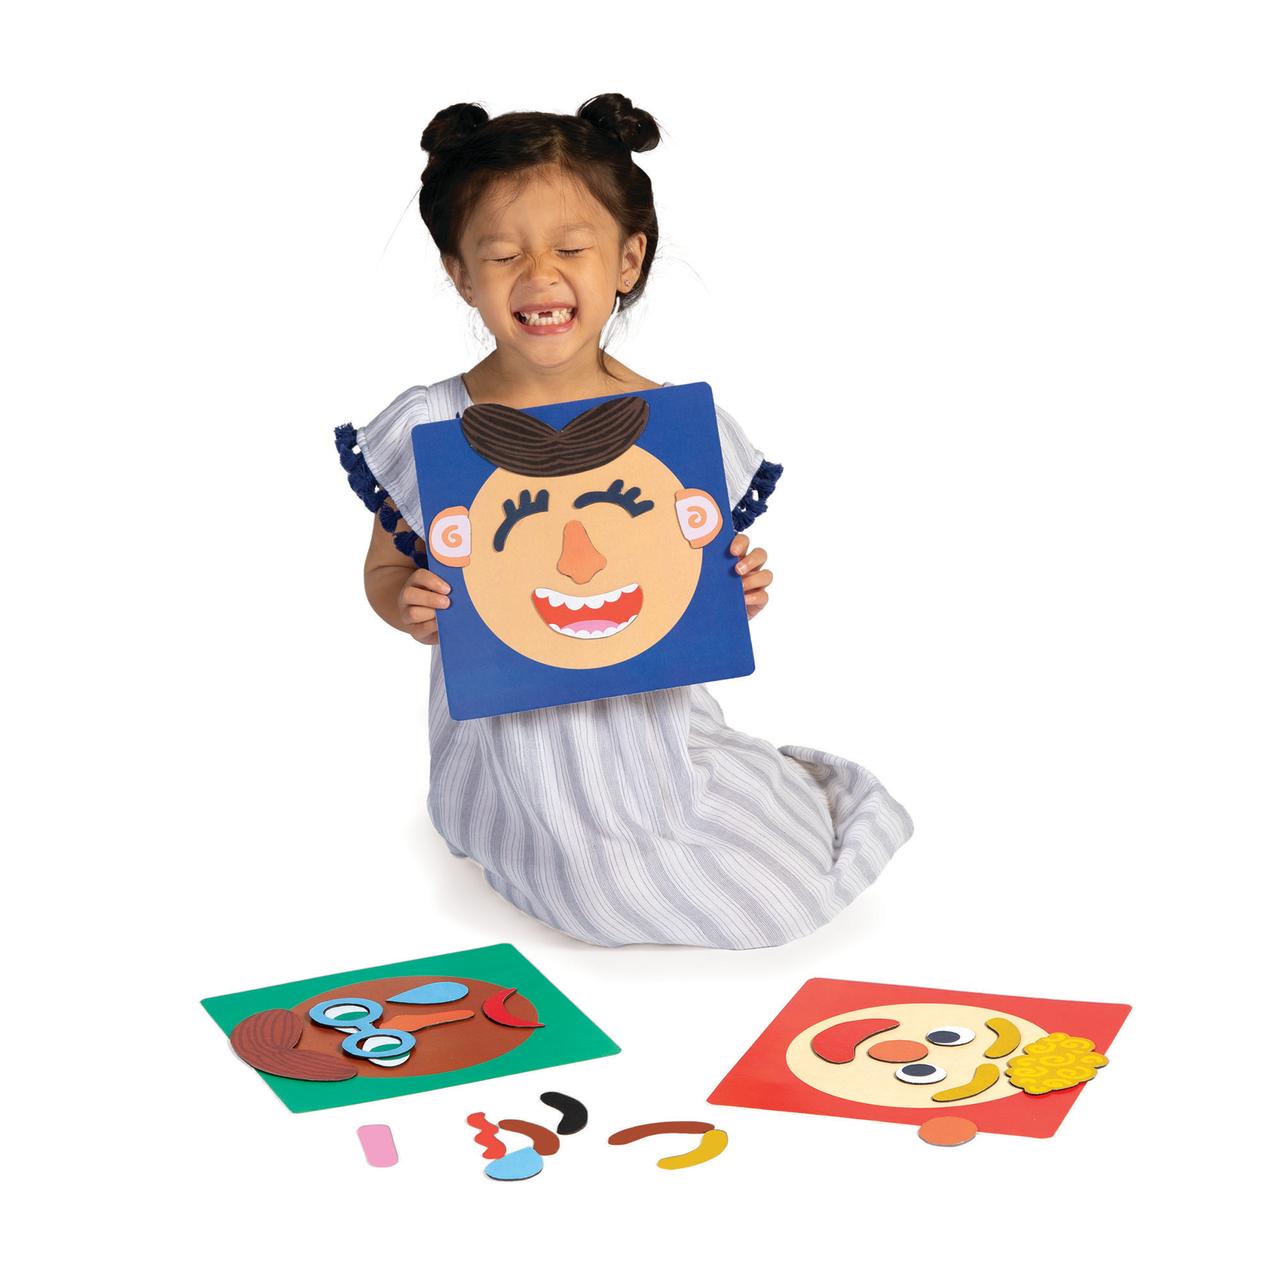 Manhattan Toy Making Faces 34-Piece Bilingual Emotion Toy for Kids 3 Years and Up for English and French Learning - image 2 of 6